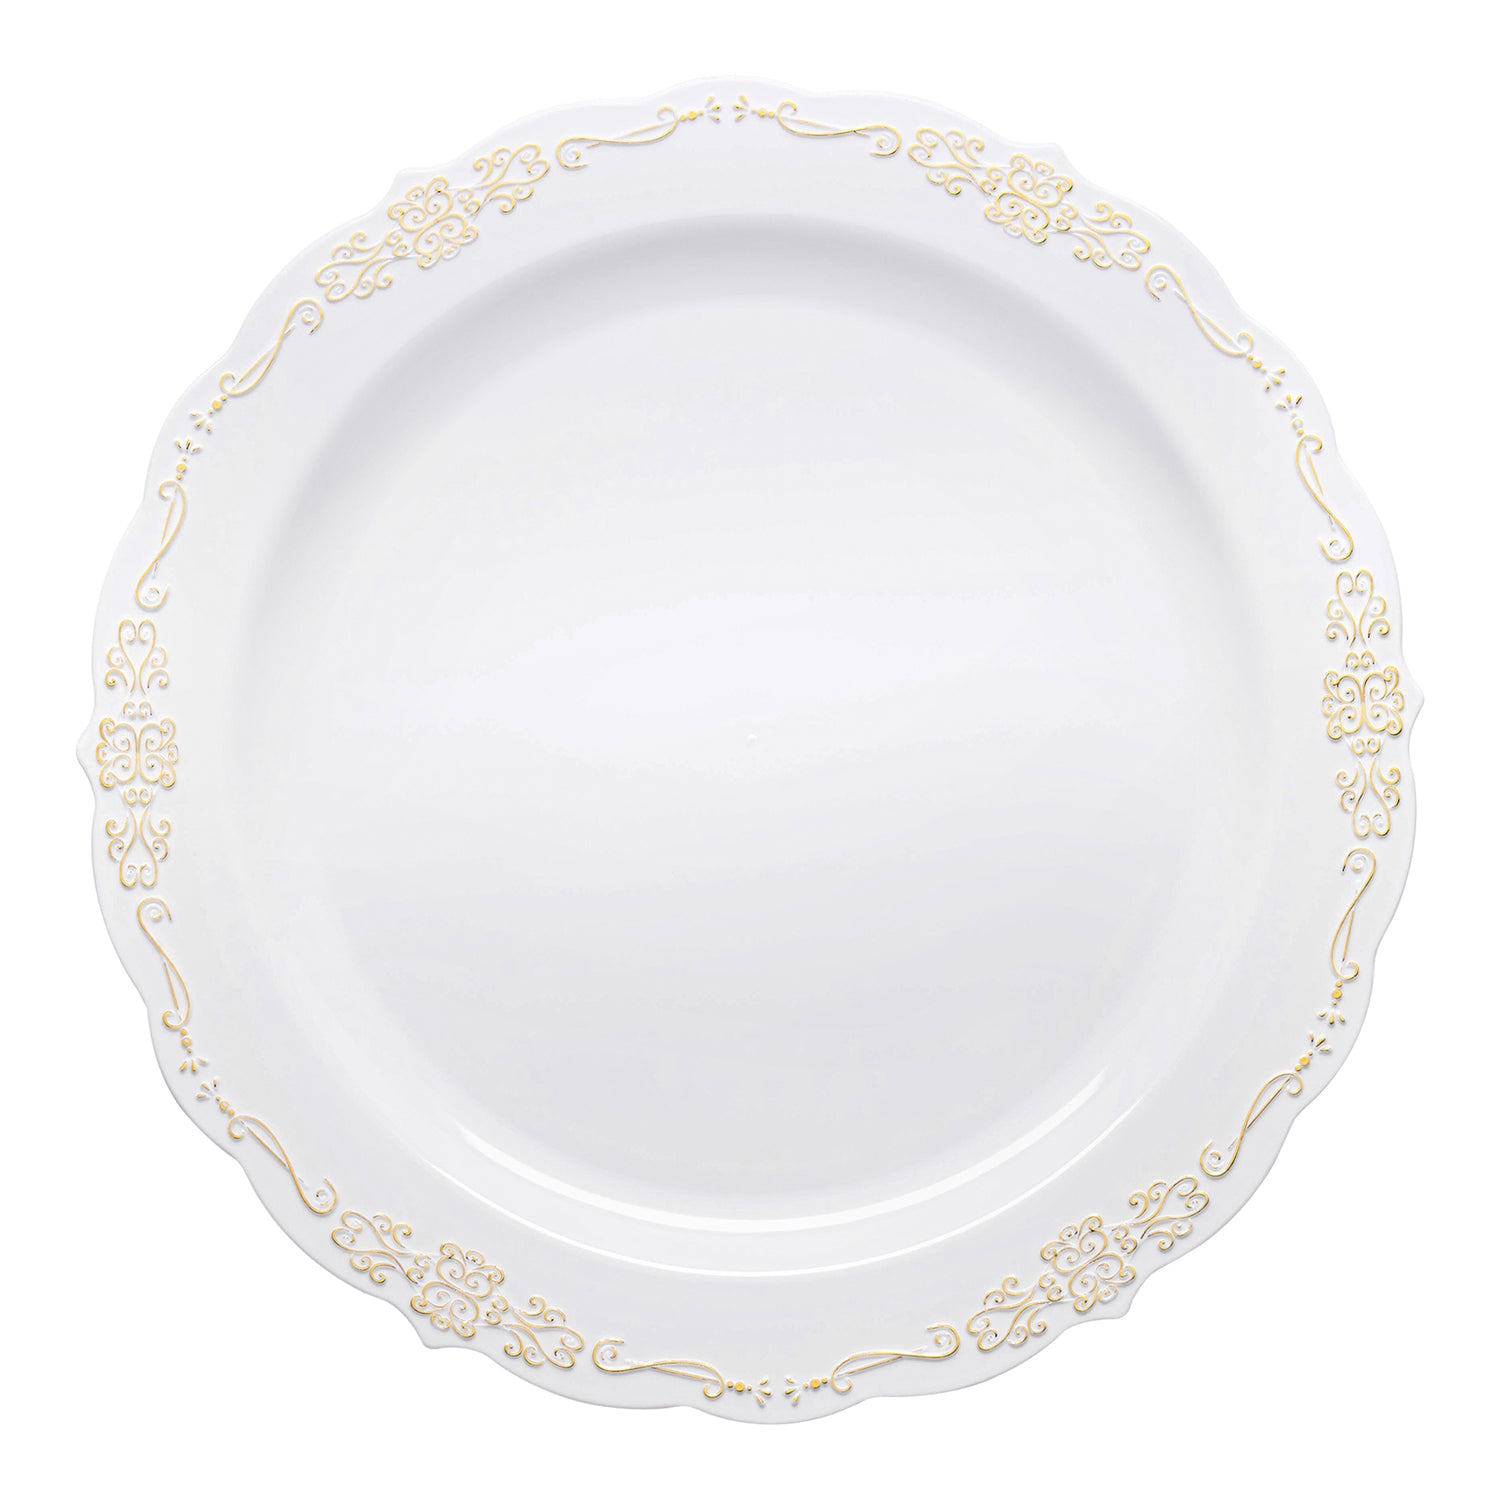 White with Gold Vintage Rim Round Disposable Plastic Appetizer/Salad Plates (7.5") | The Kaya Collection